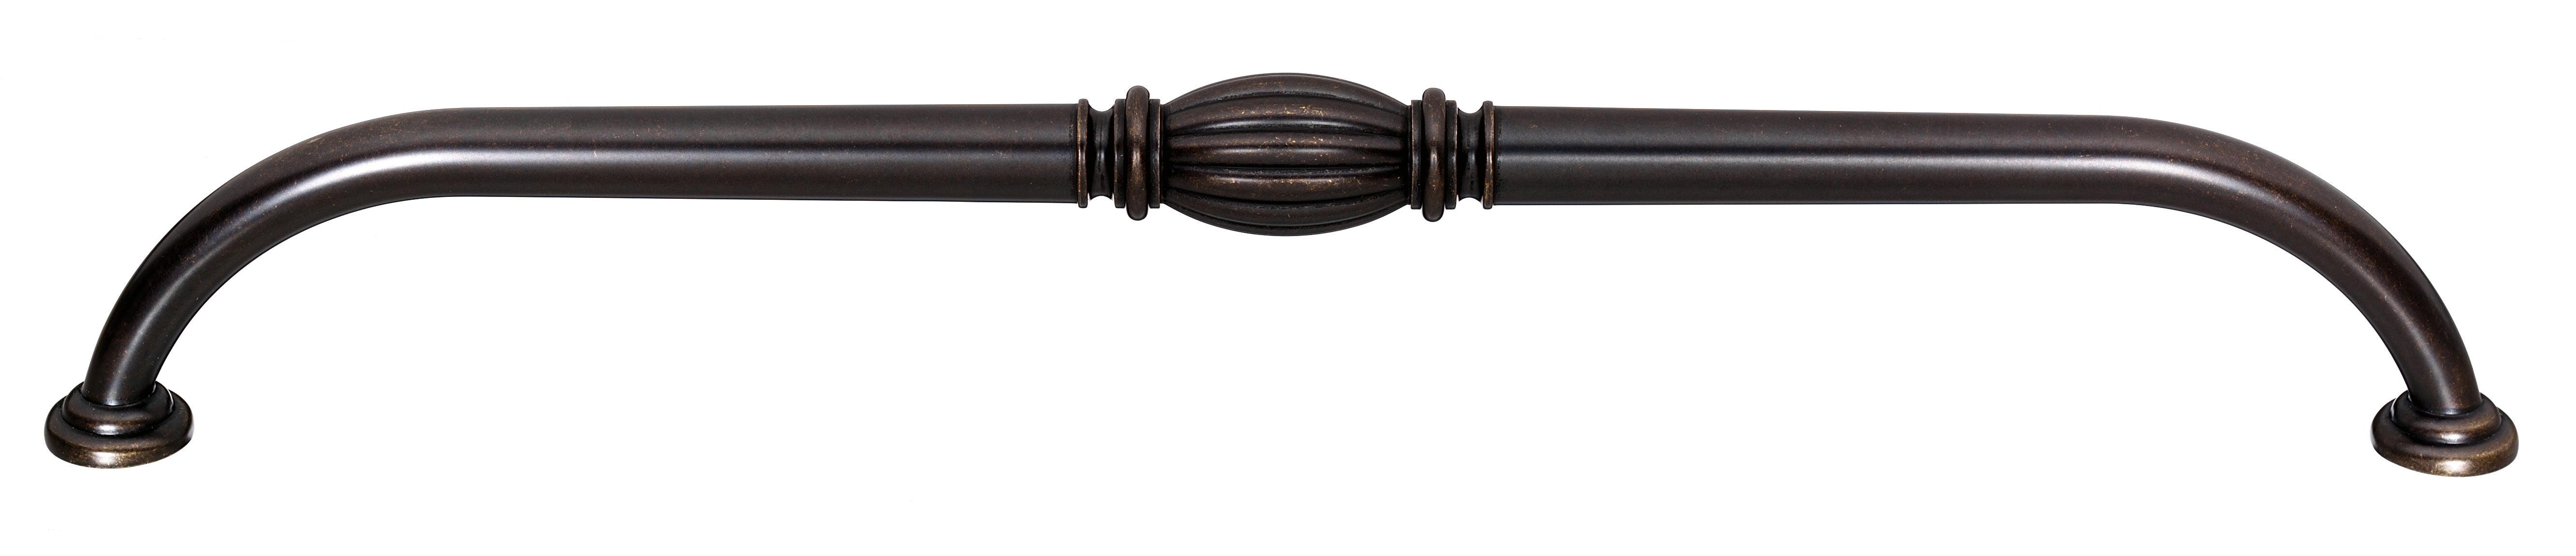 Alno Tuscany 18" Appliance Pull